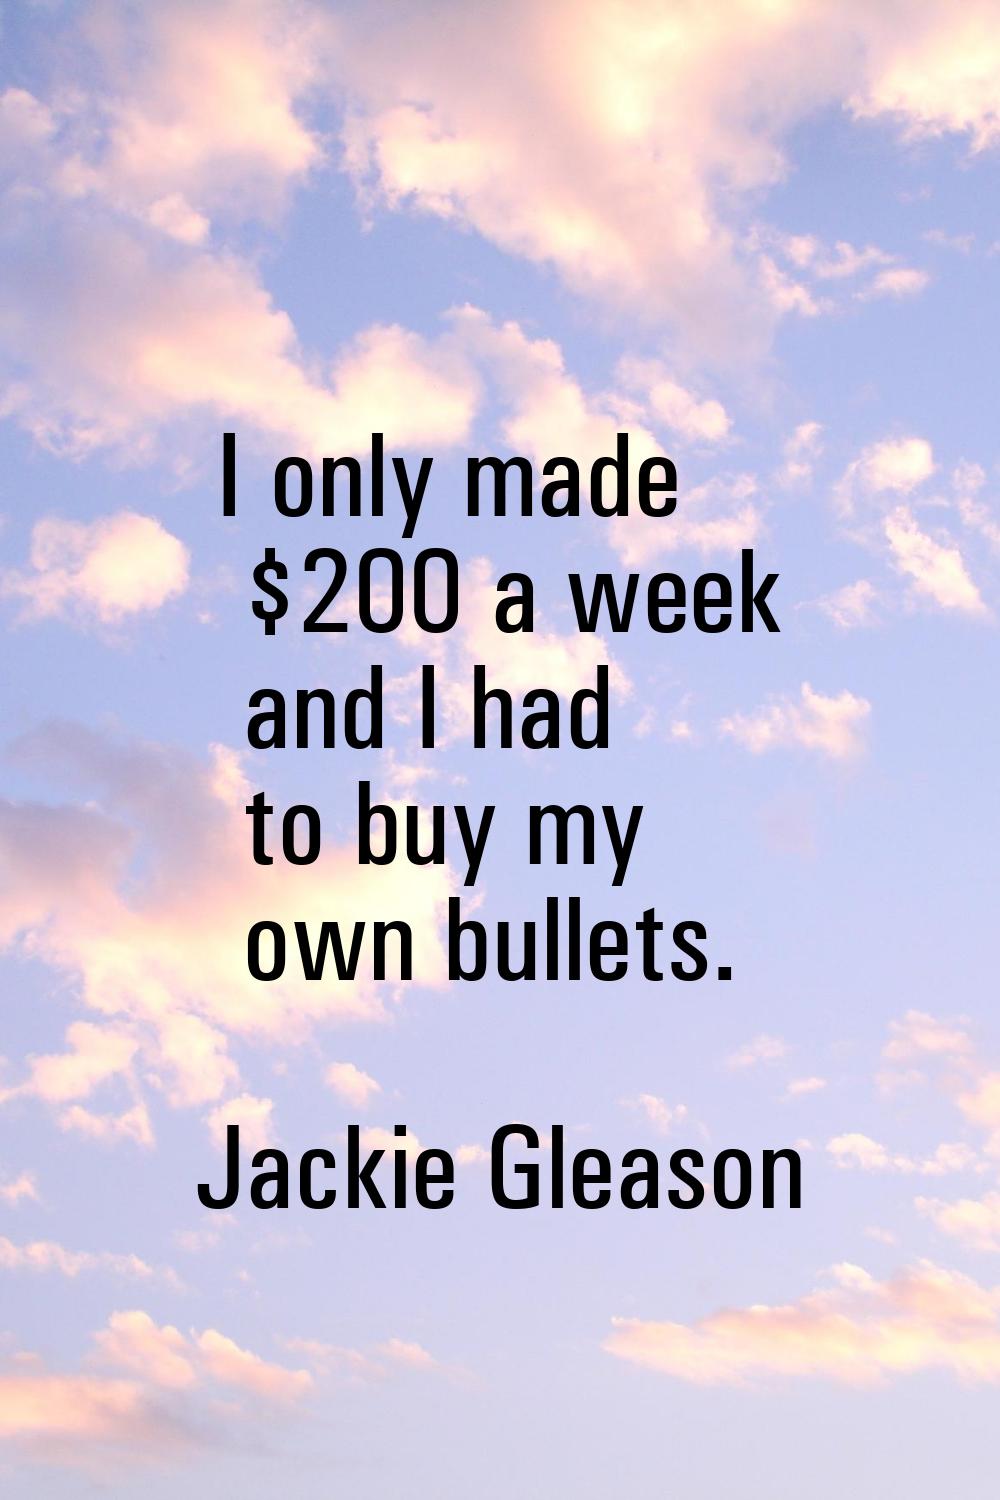 I only made $200 a week and I had to buy my own bullets.